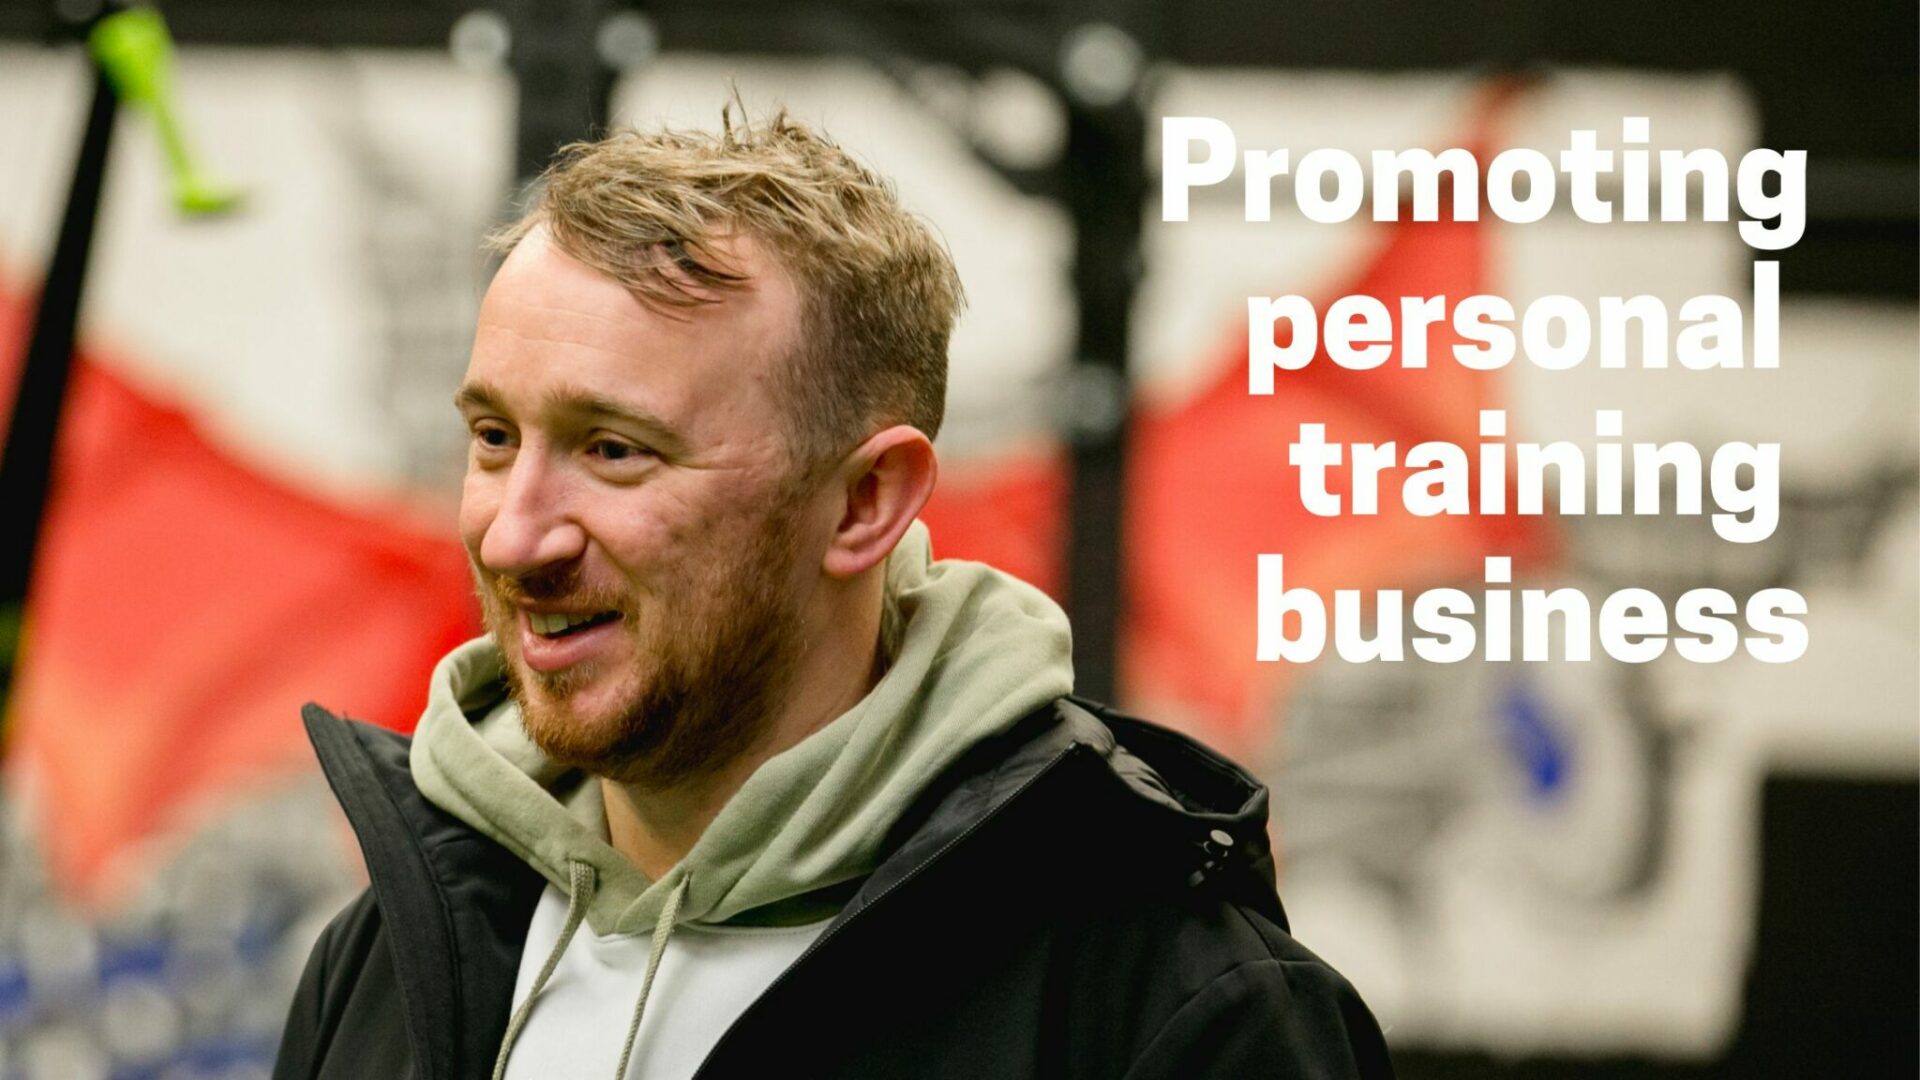 Promoting personal training business